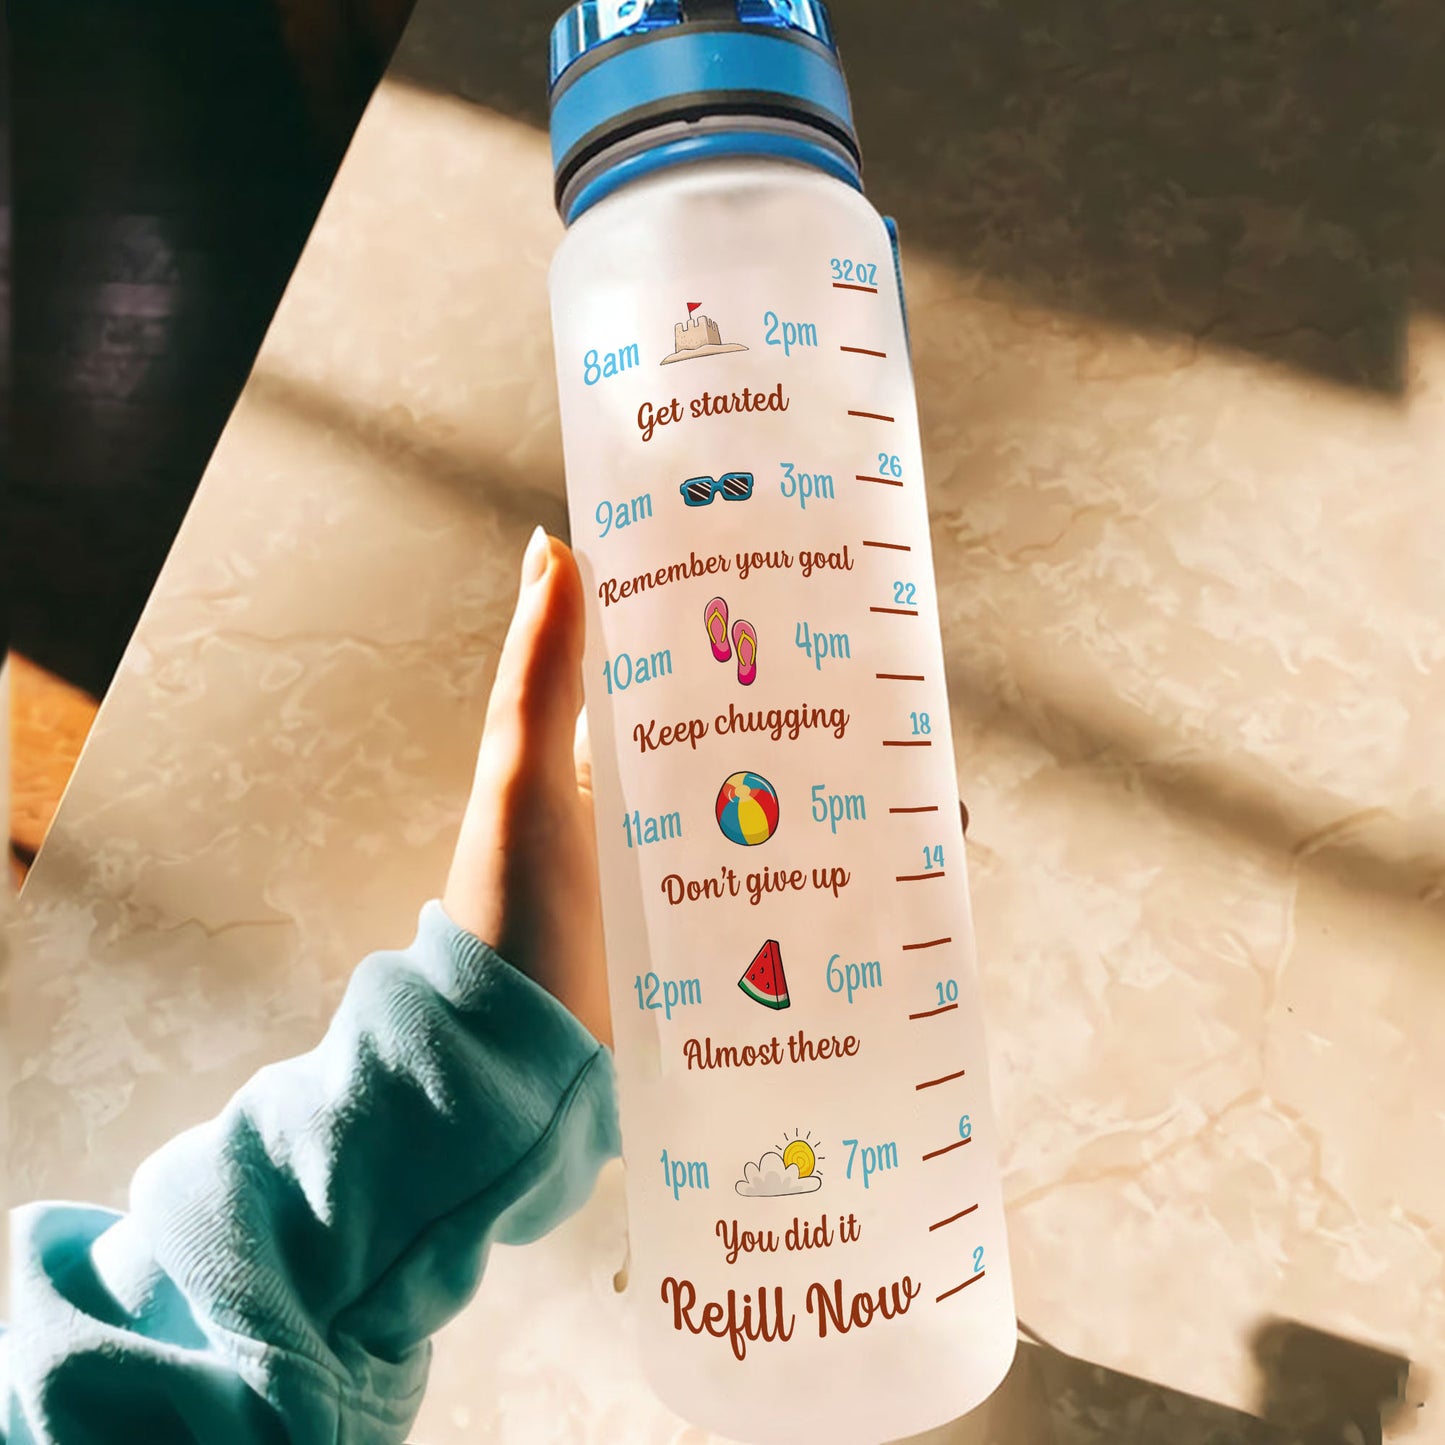 I Need Water With Vitamin Sea  - Personalized Water Bottle With Time Marker - Summer Vibe Gift For Her, Friend, Beach Lover, Girl, Vacation